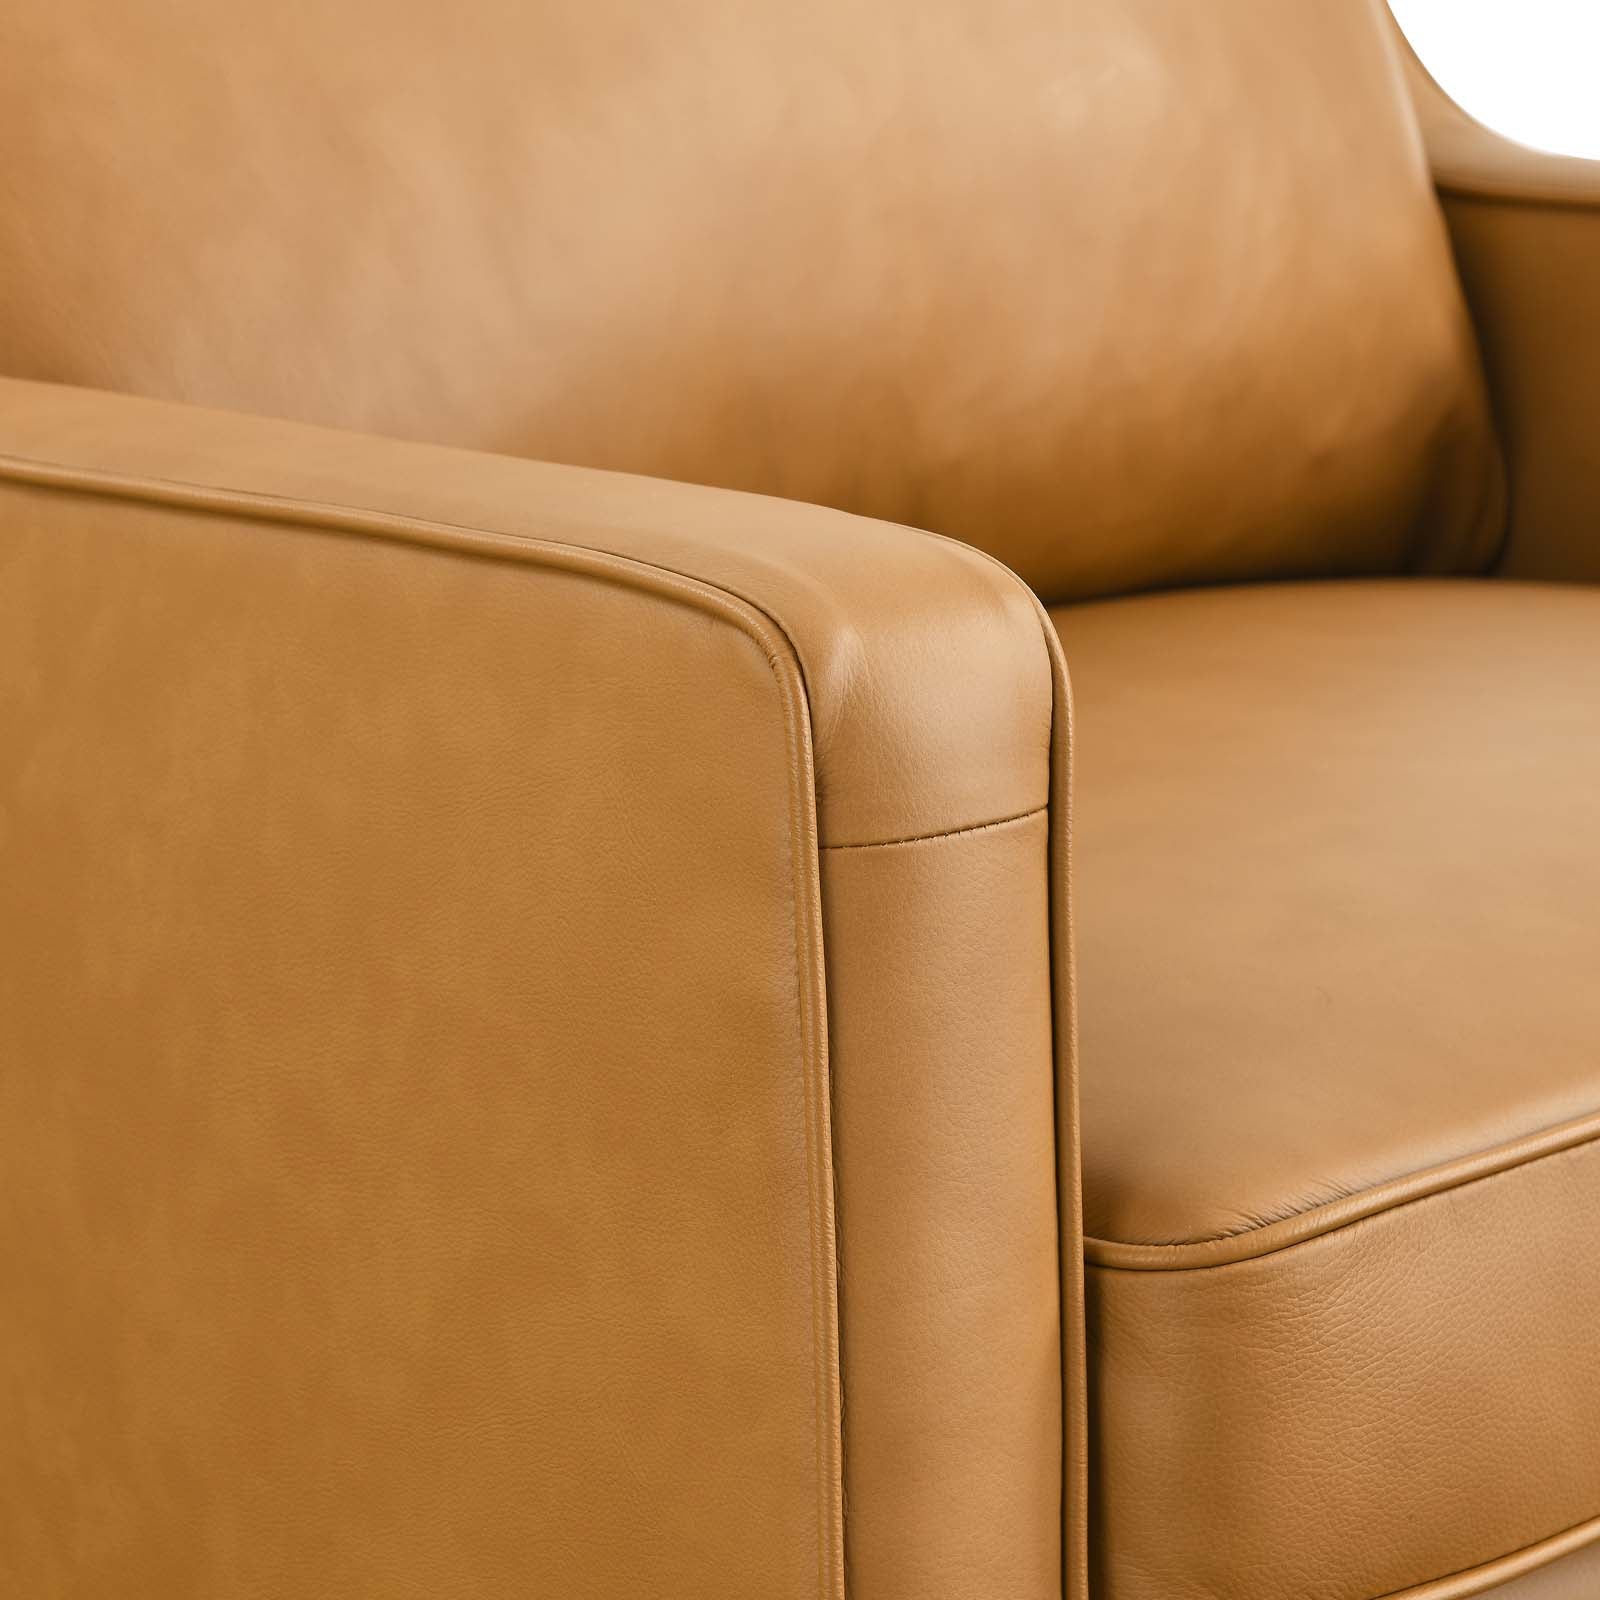 Modway Accent Chairs - Impart Genuine Leather Armchair Tan